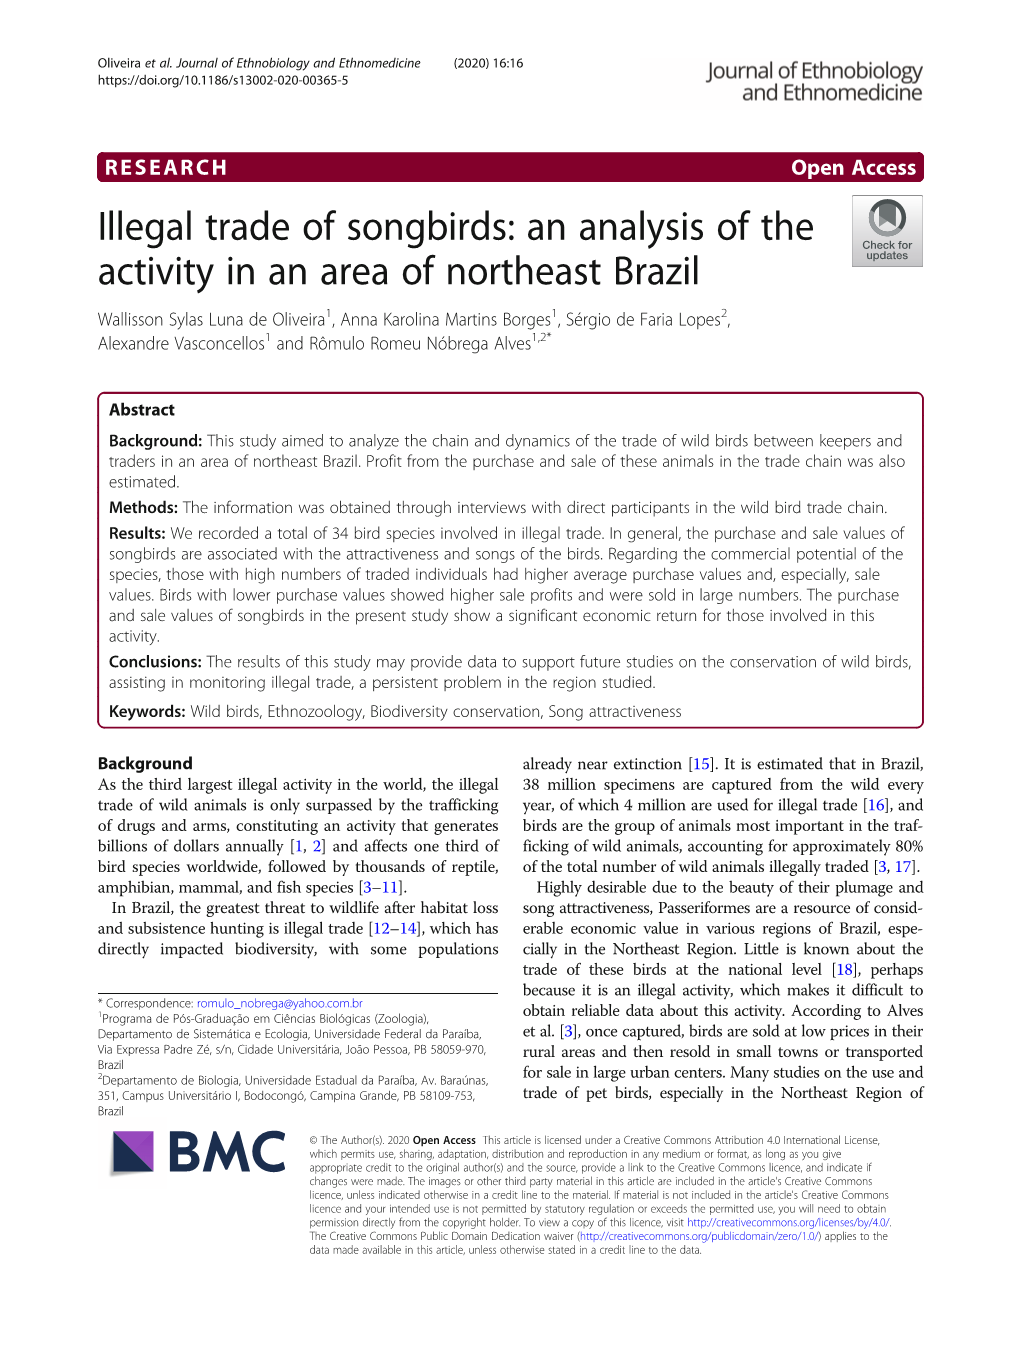 Illegal Trade of Songbirds: an Analysis of the Activity in an Area of Northeast